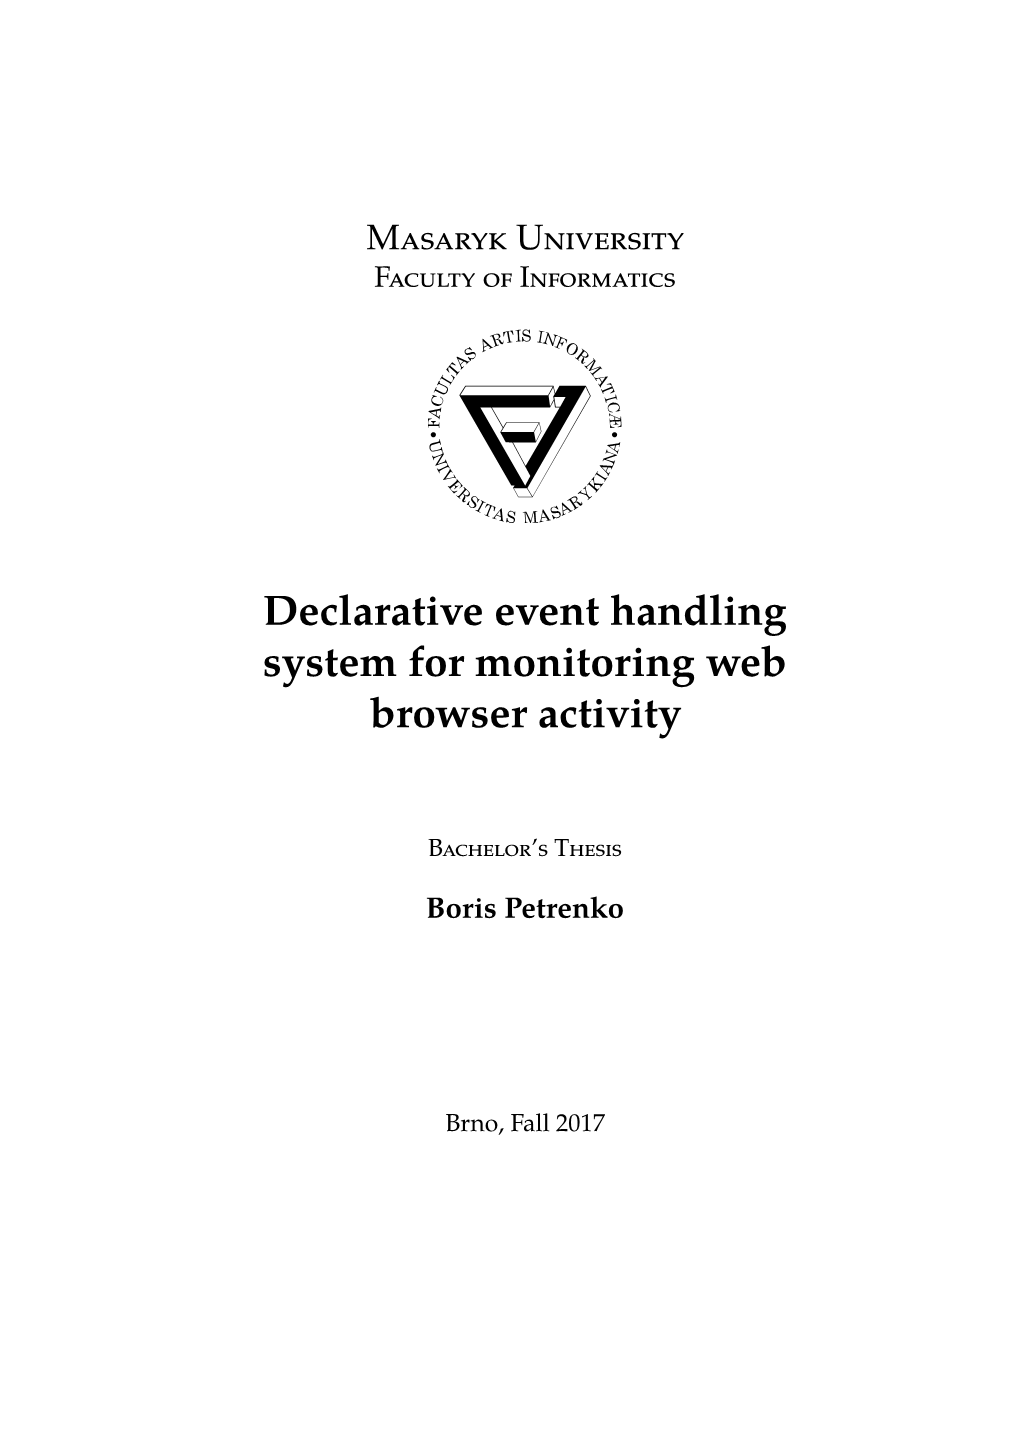 Declarative Event Handling System for Monitoring Web Browser Activity